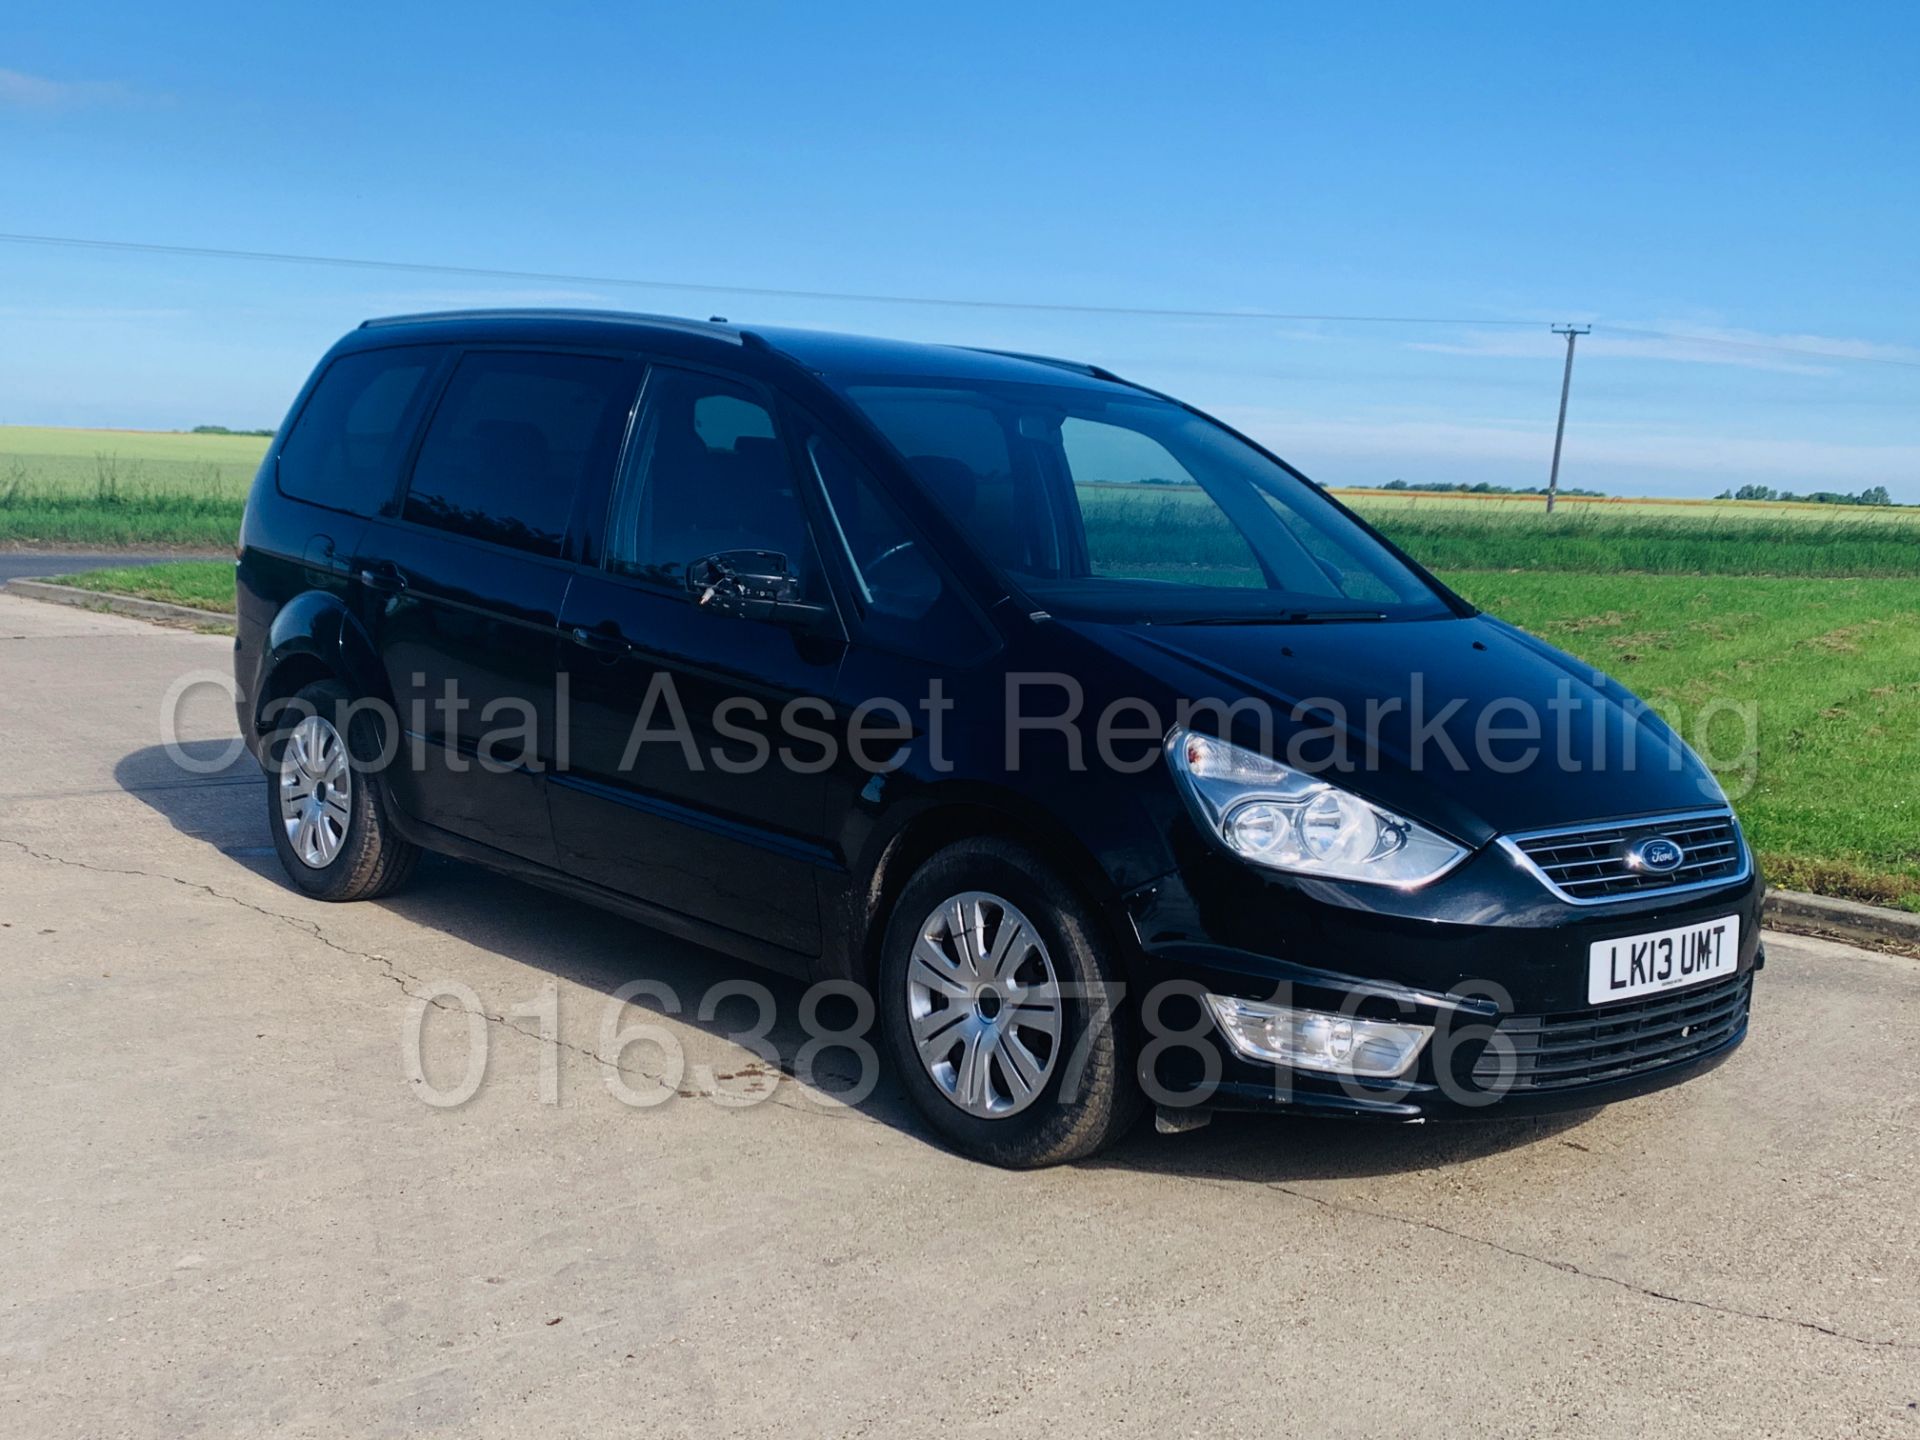 (ON SALE) FORD GALAXY *ZETEC* 7 SEATER MPV (2013) '2.0 TDCI - POWER SHIFT' (NO VAT - SAVE 20%) - Image 8 of 31